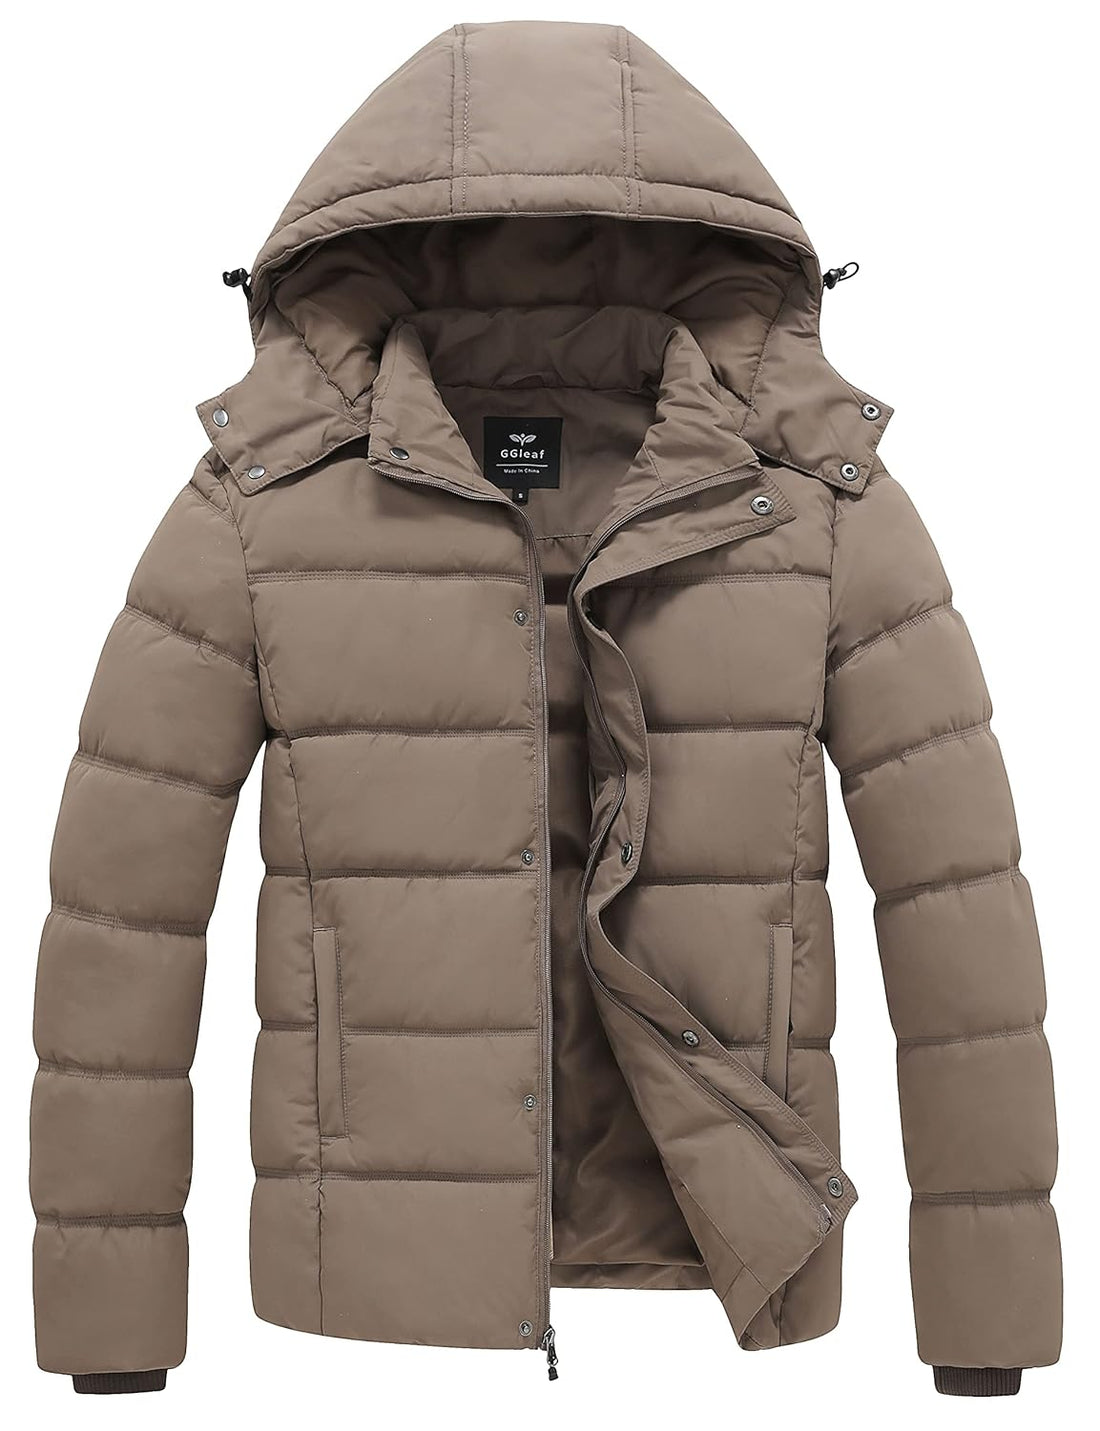 GGleaf Men's Hooded Winter Coat Warm Puffer Jacket Thicken Cotton Coat with Removable Hood, Khaki, XX-Large